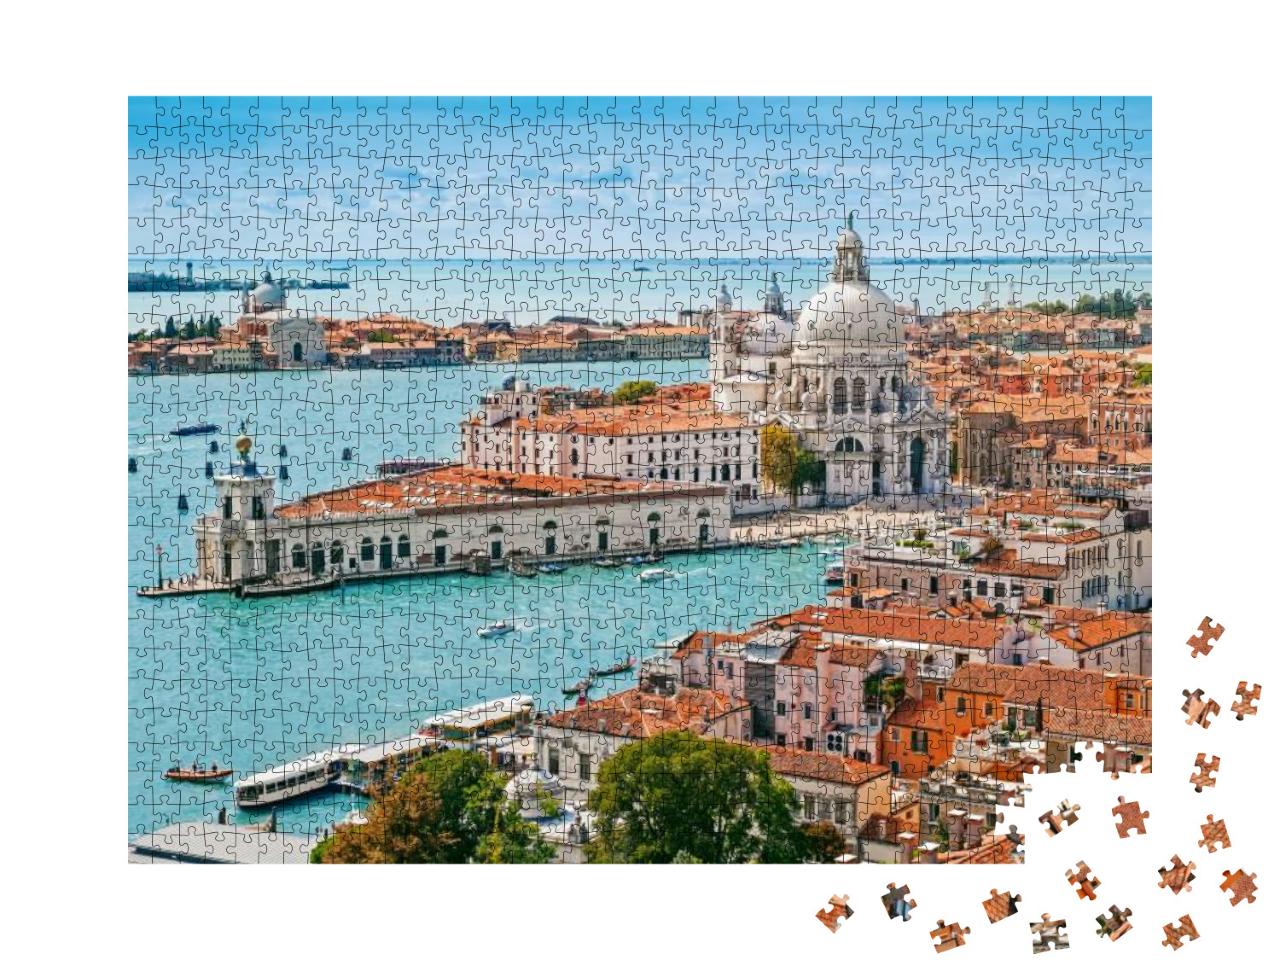 Panoramic Aerial Cityscape of Venice with Santa Maria Del... Jigsaw Puzzle with 1000 pieces